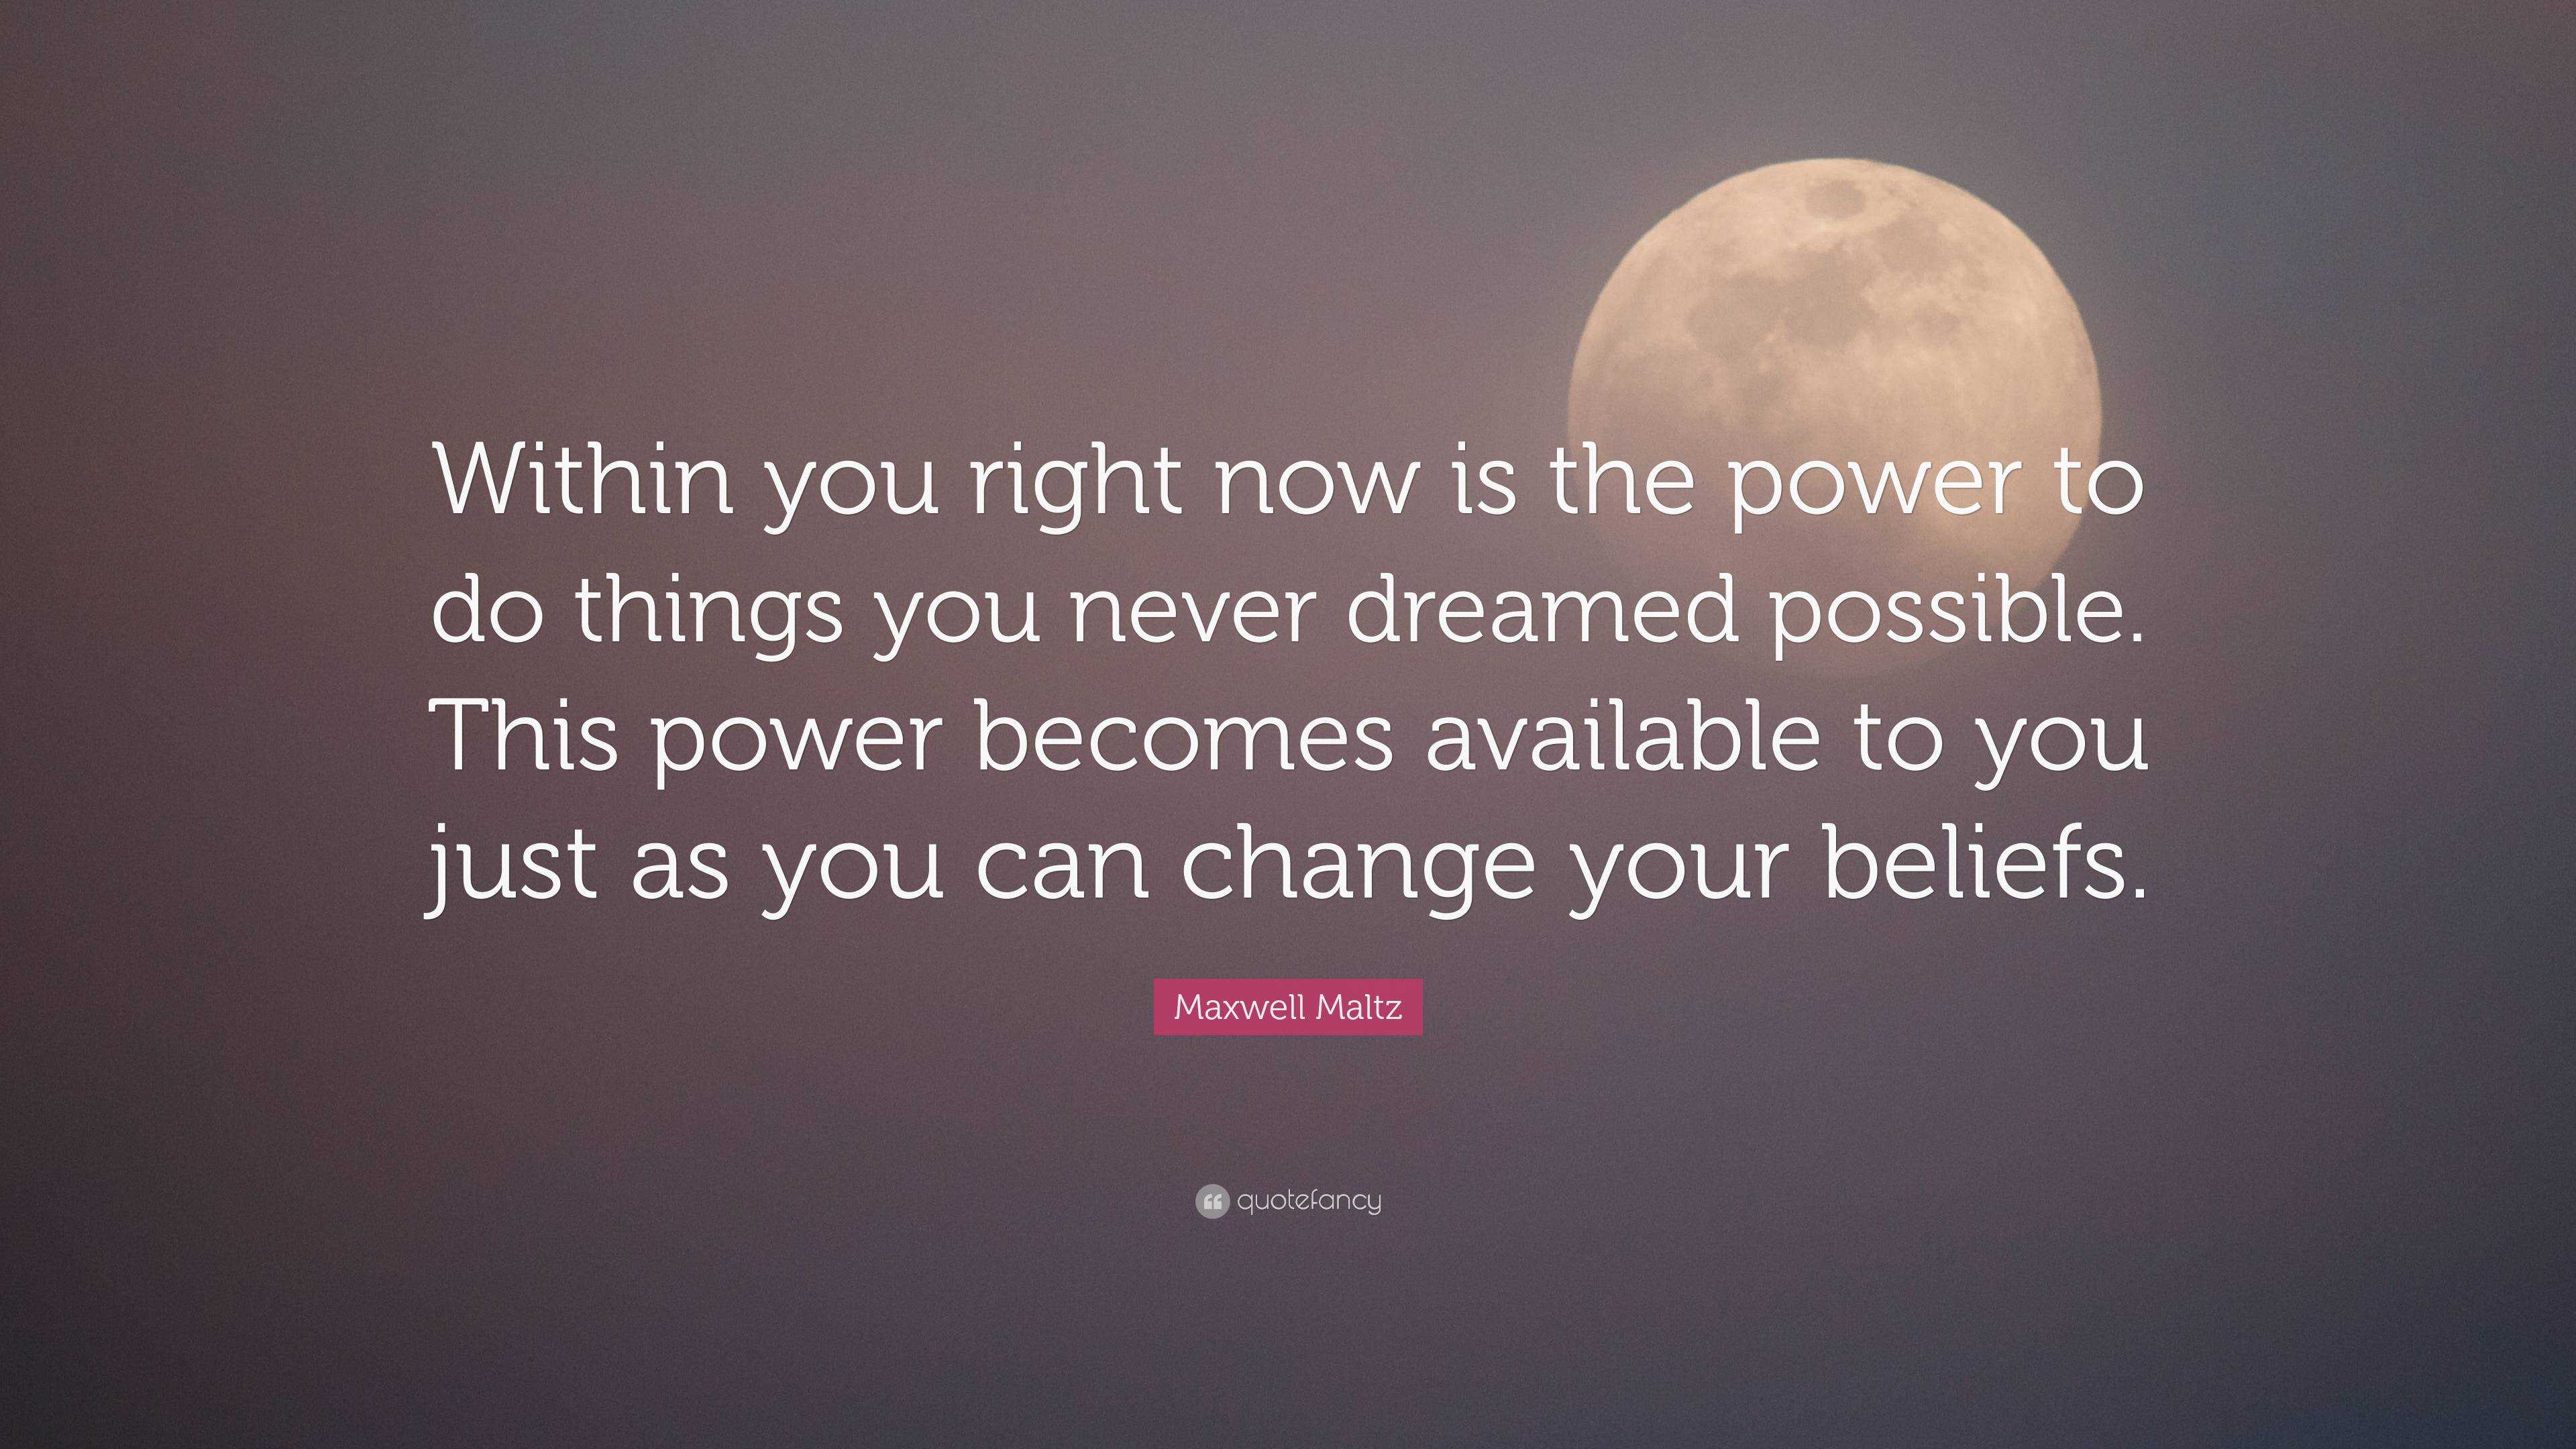 Maxwell Maltz Quote: “Within you right now is the power to do things ...